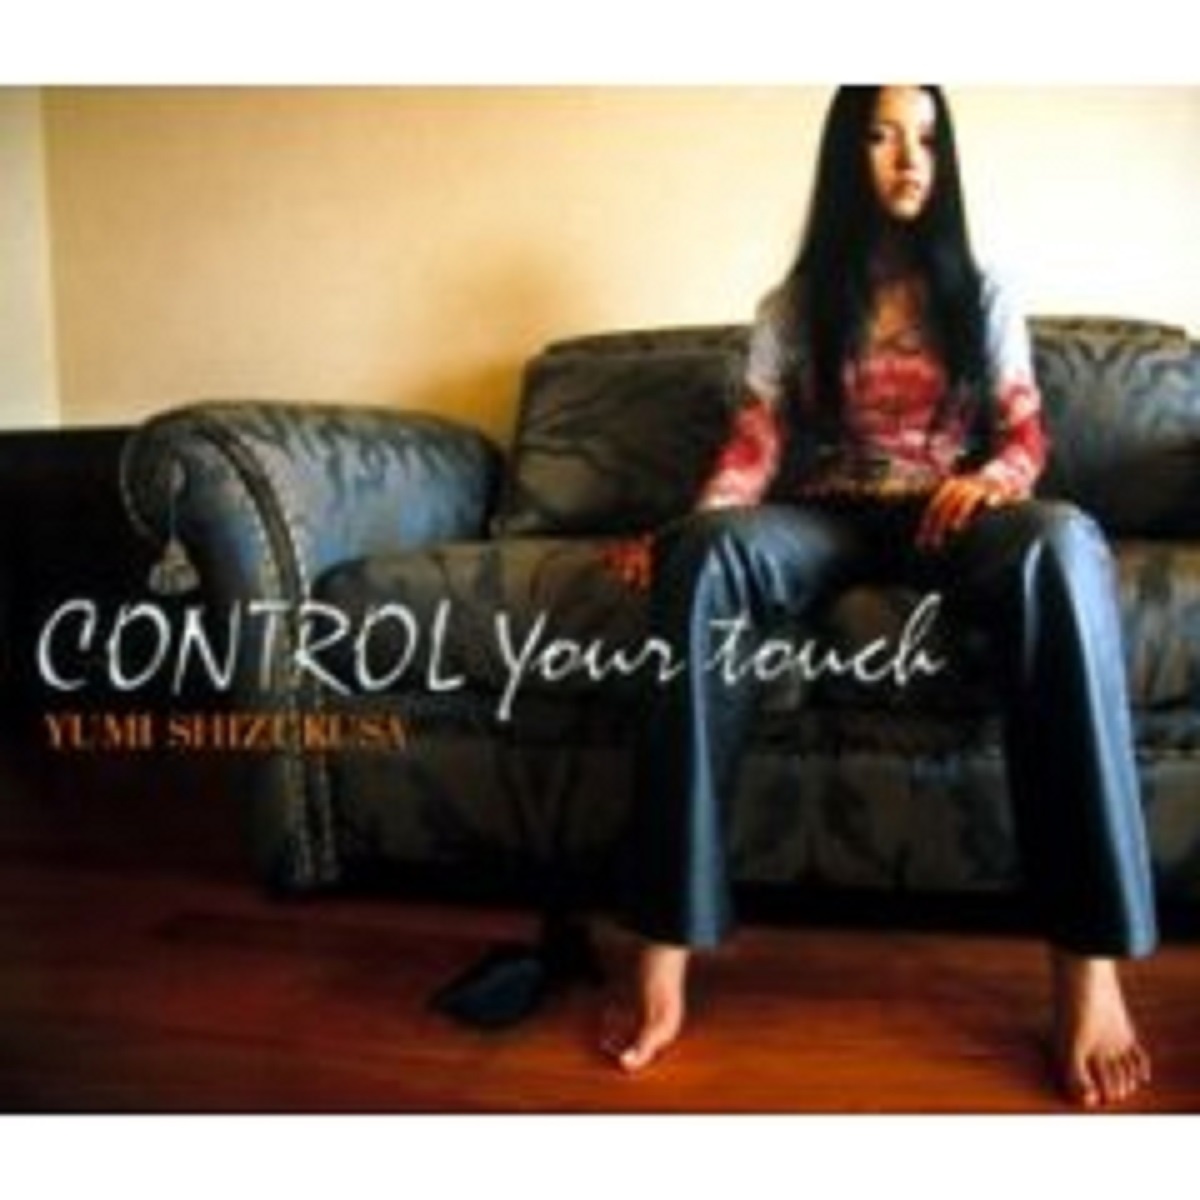 CONTROL Your touch(instrumental)